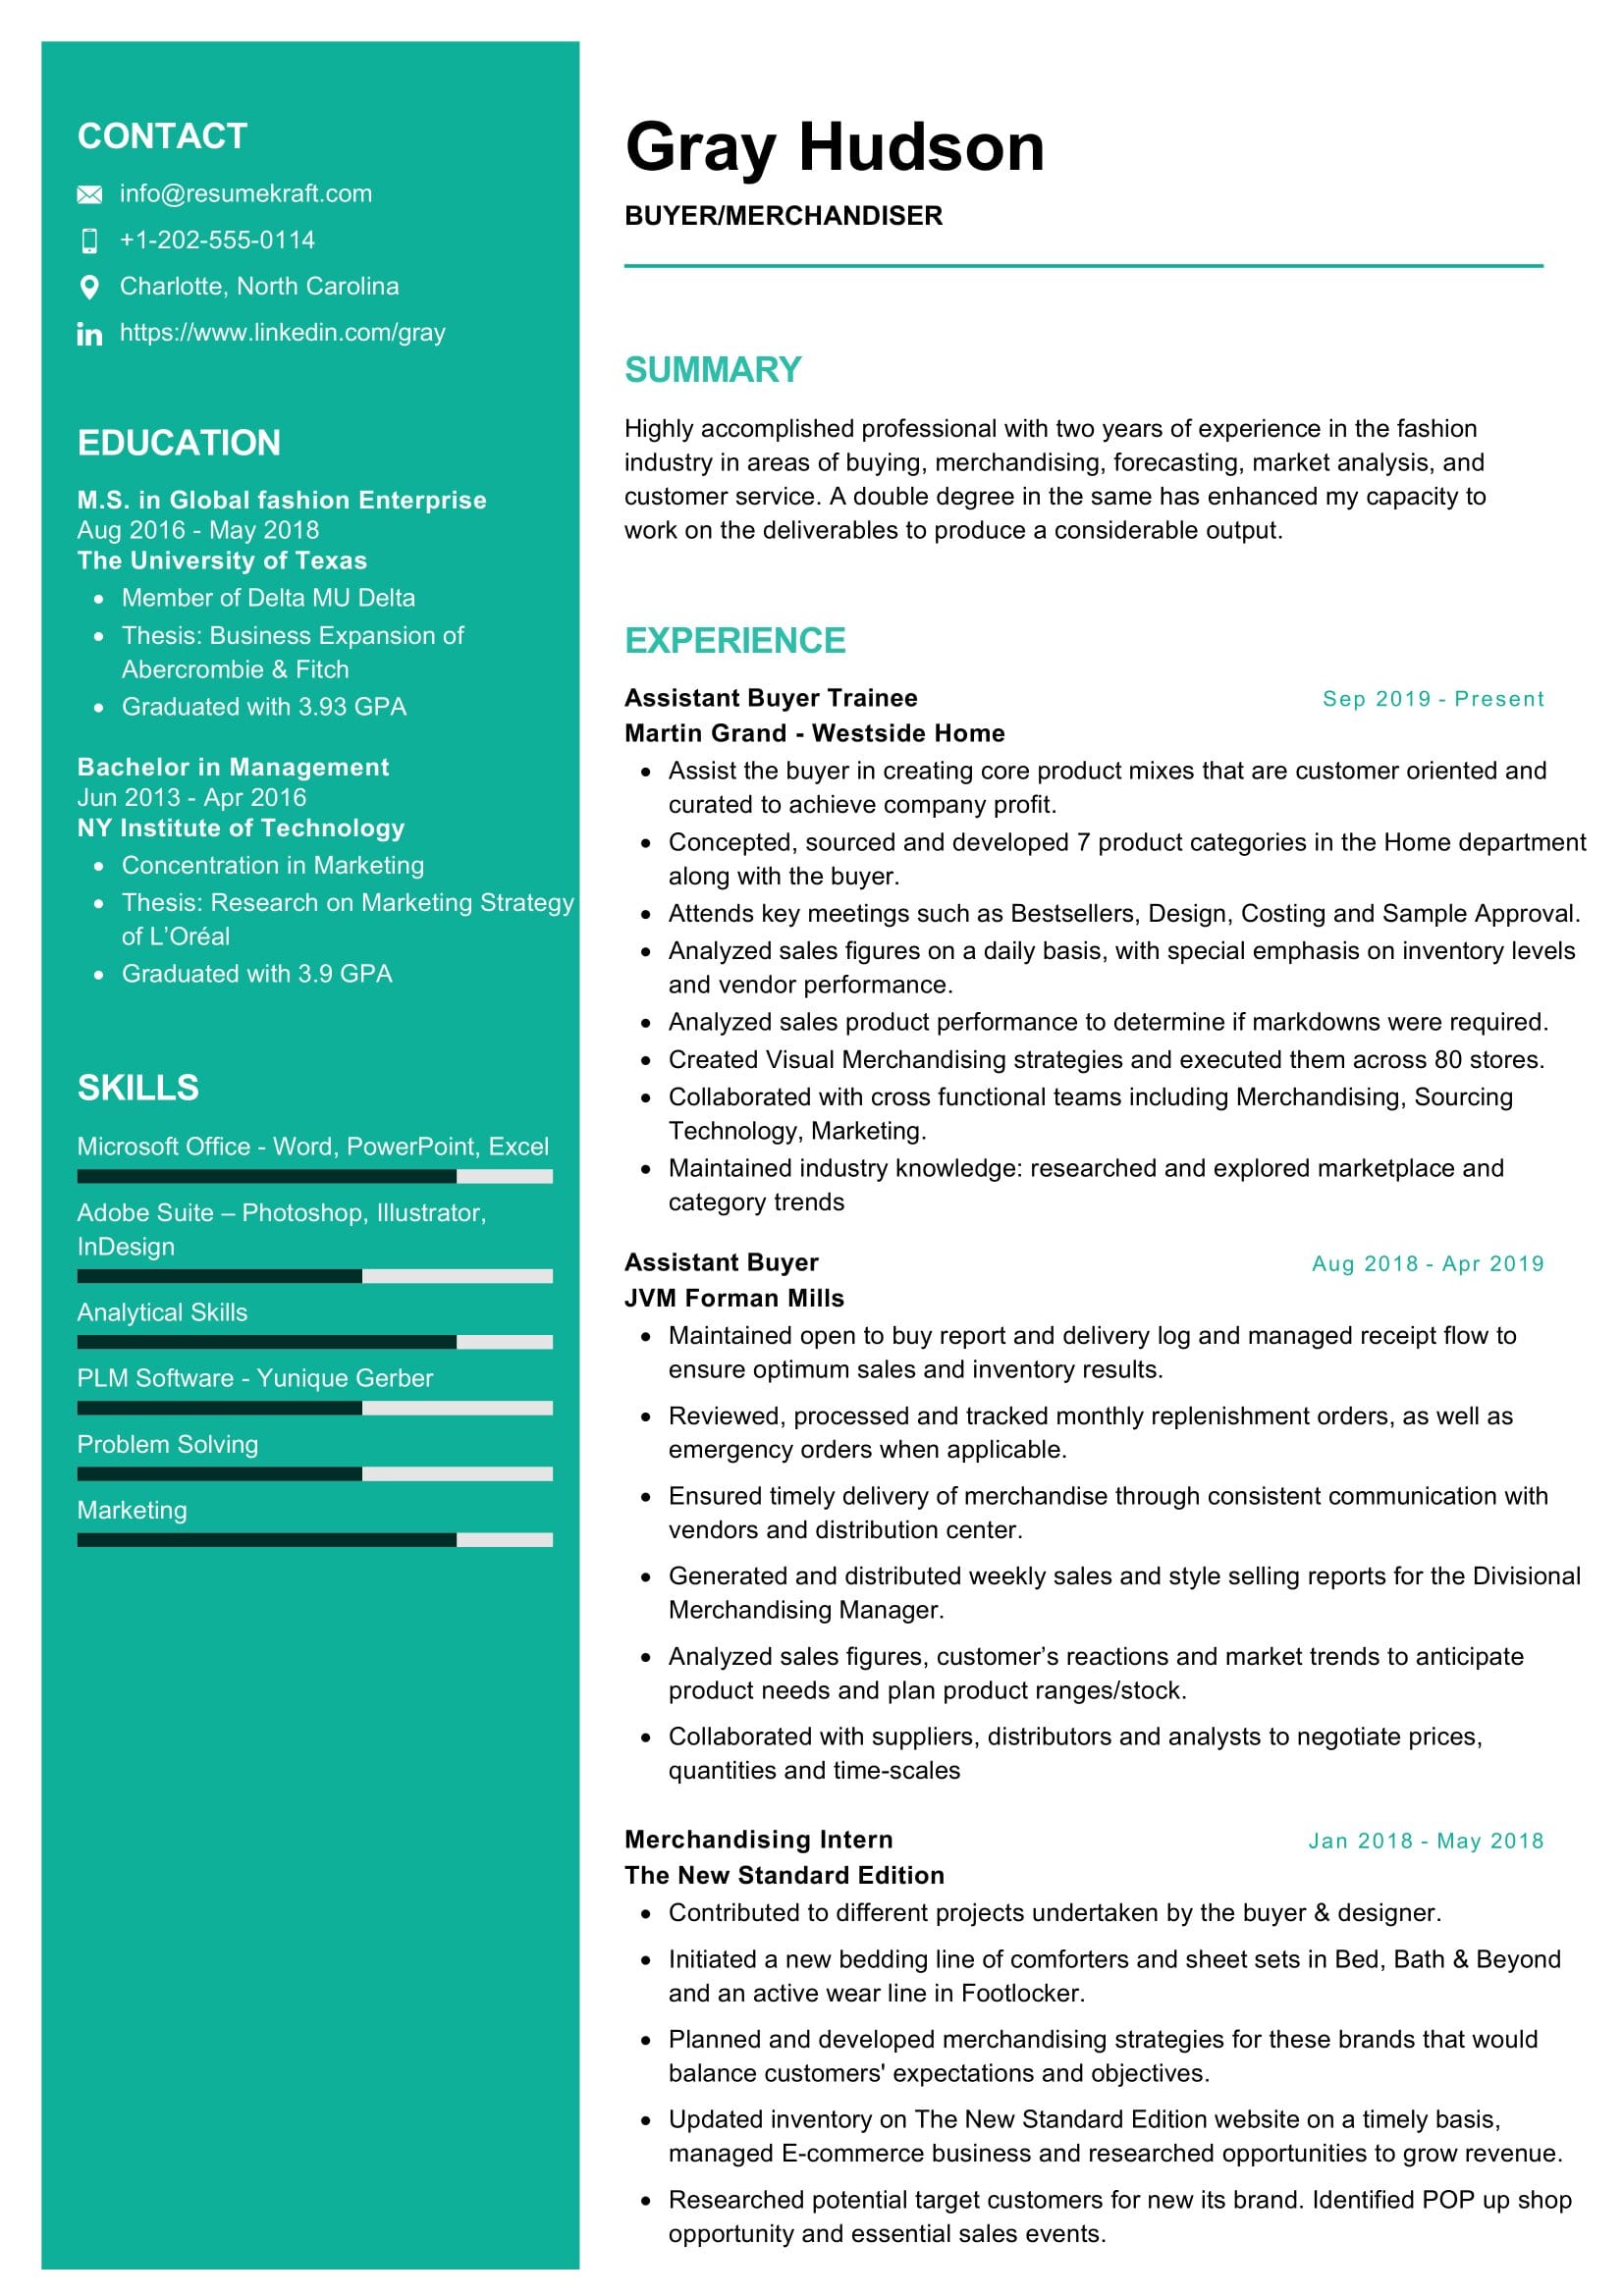 resume objective examples for visual merchandiser